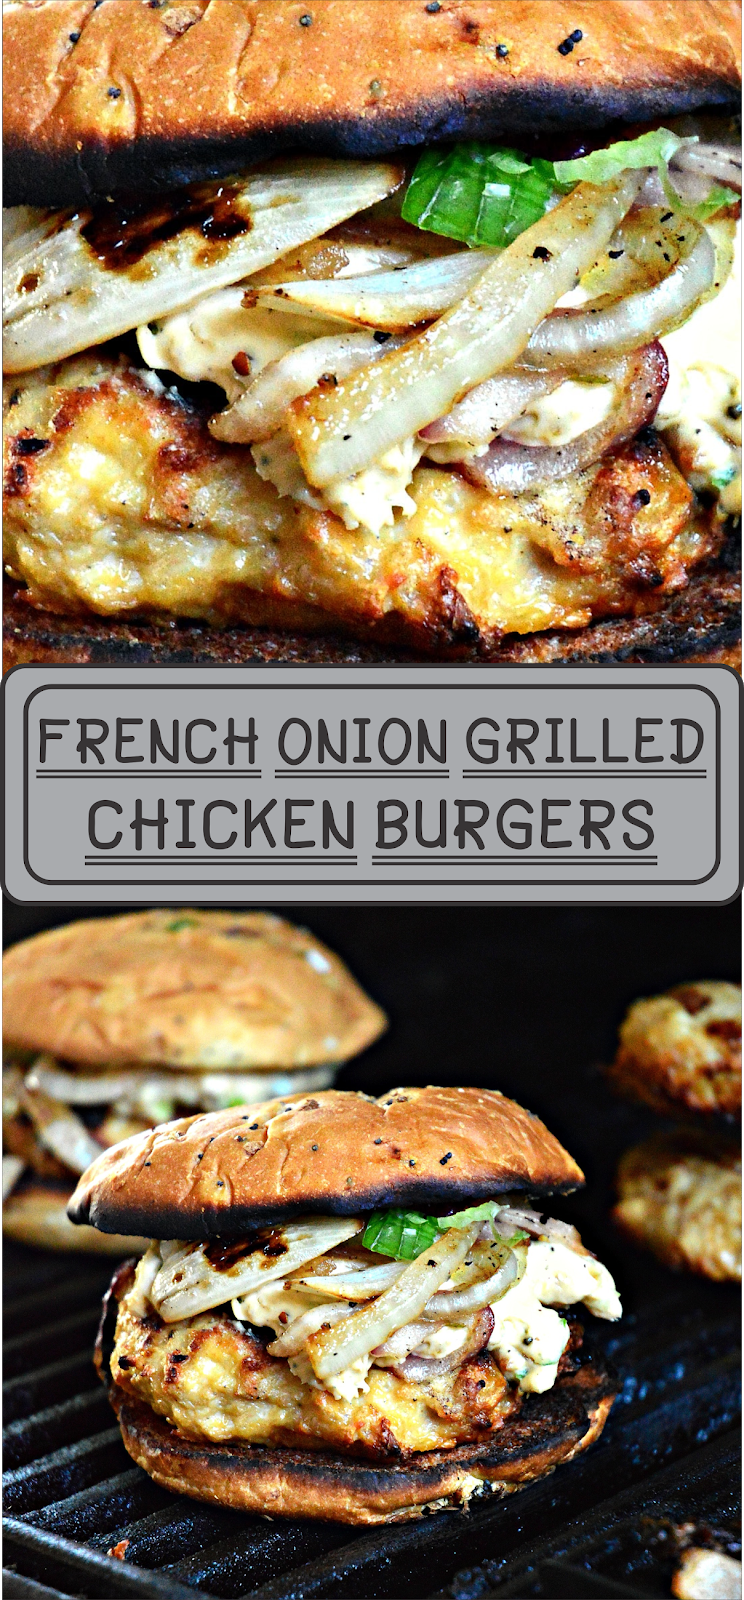 French Onion Grilled Chicken Burgers | Floats CO